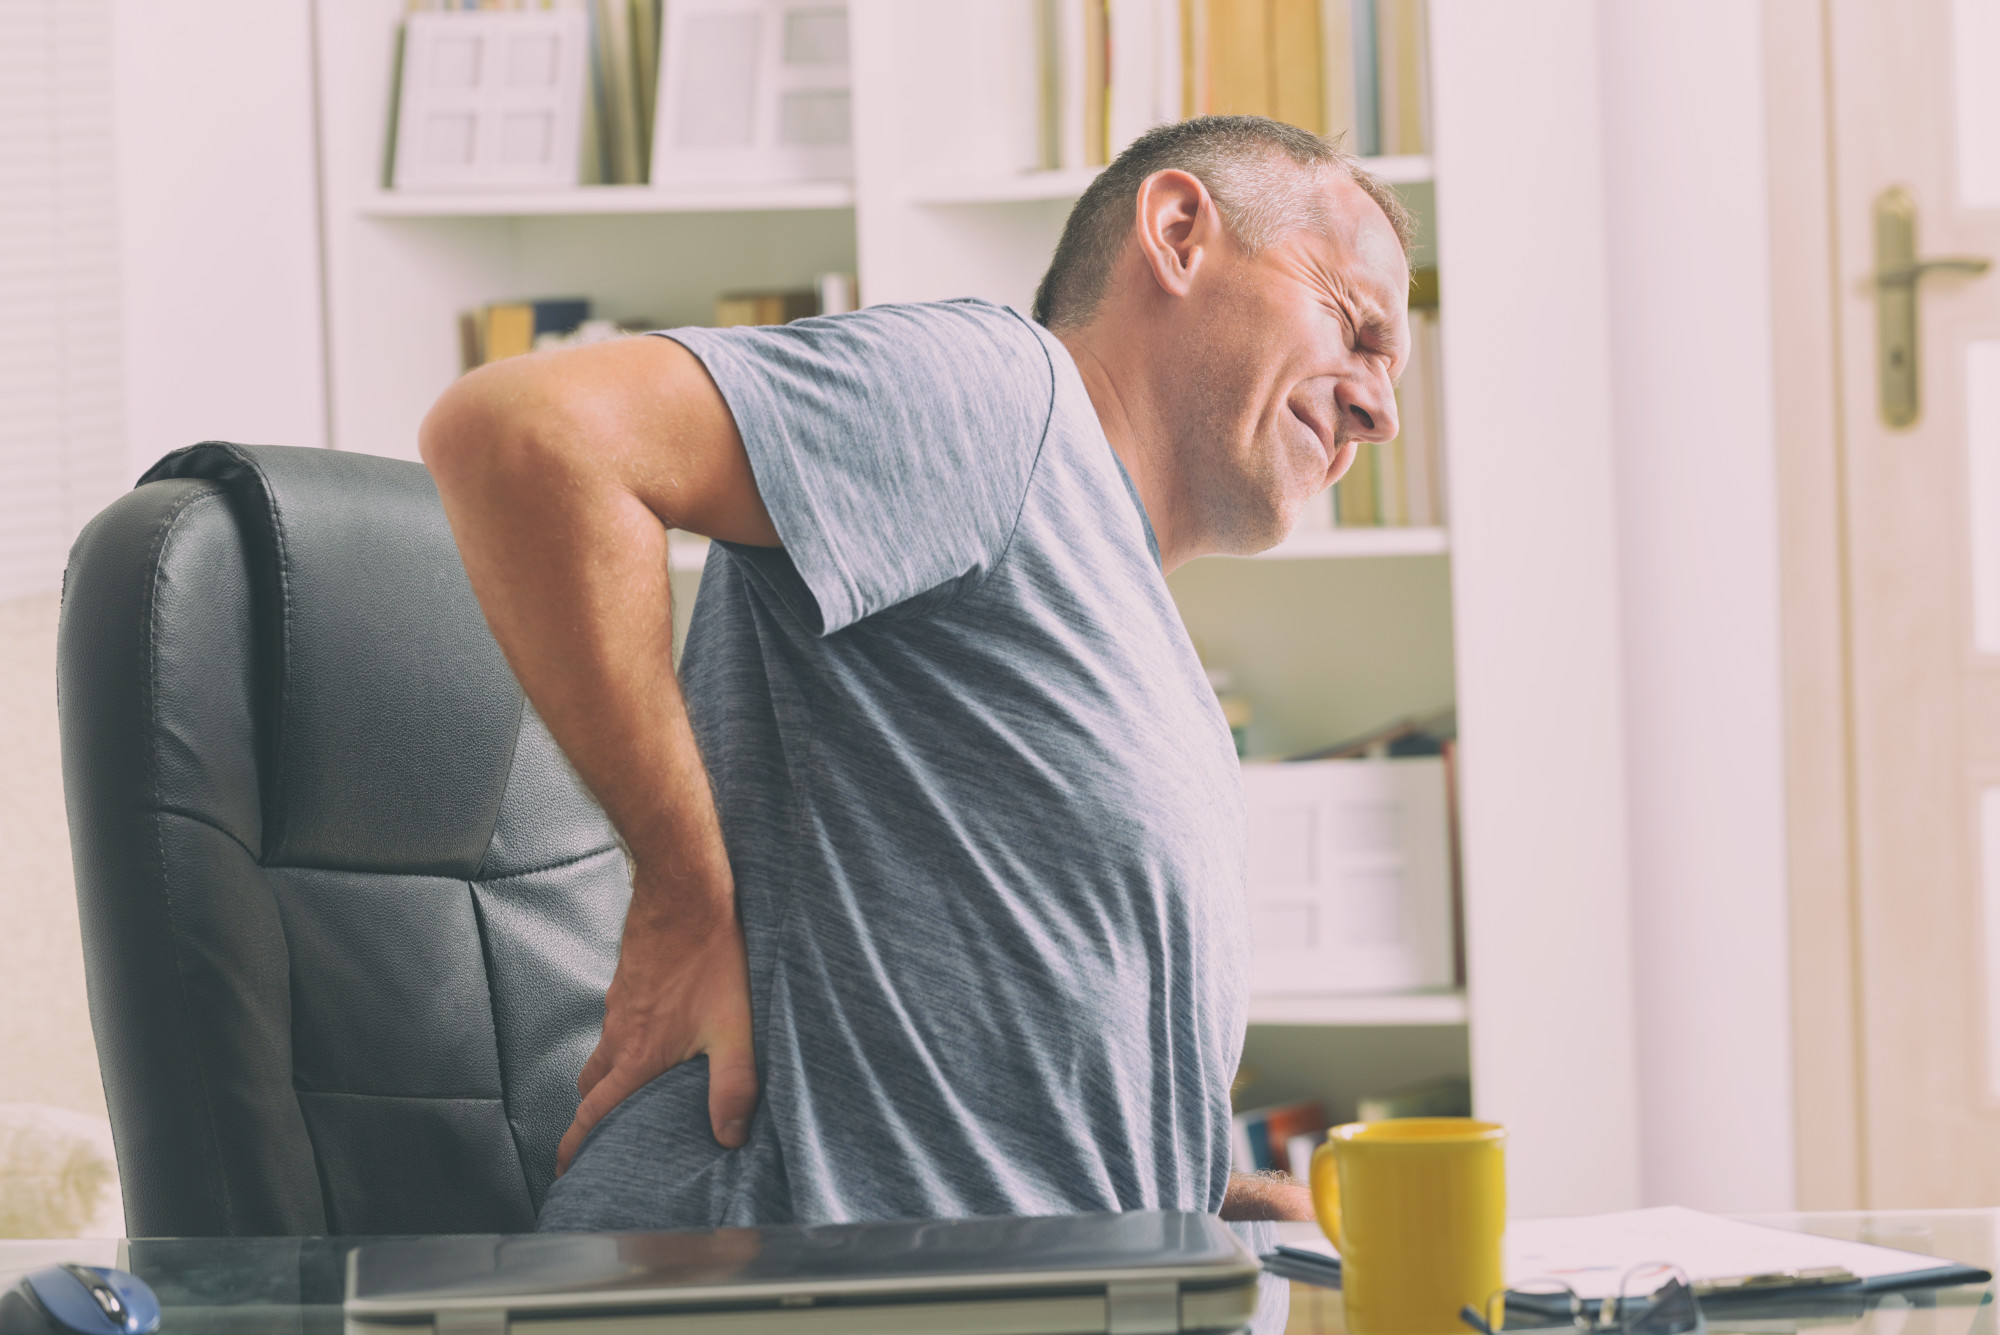 There are many different types of chronic lower back pain treatment, but which is the most effective? Learn more in this guide.